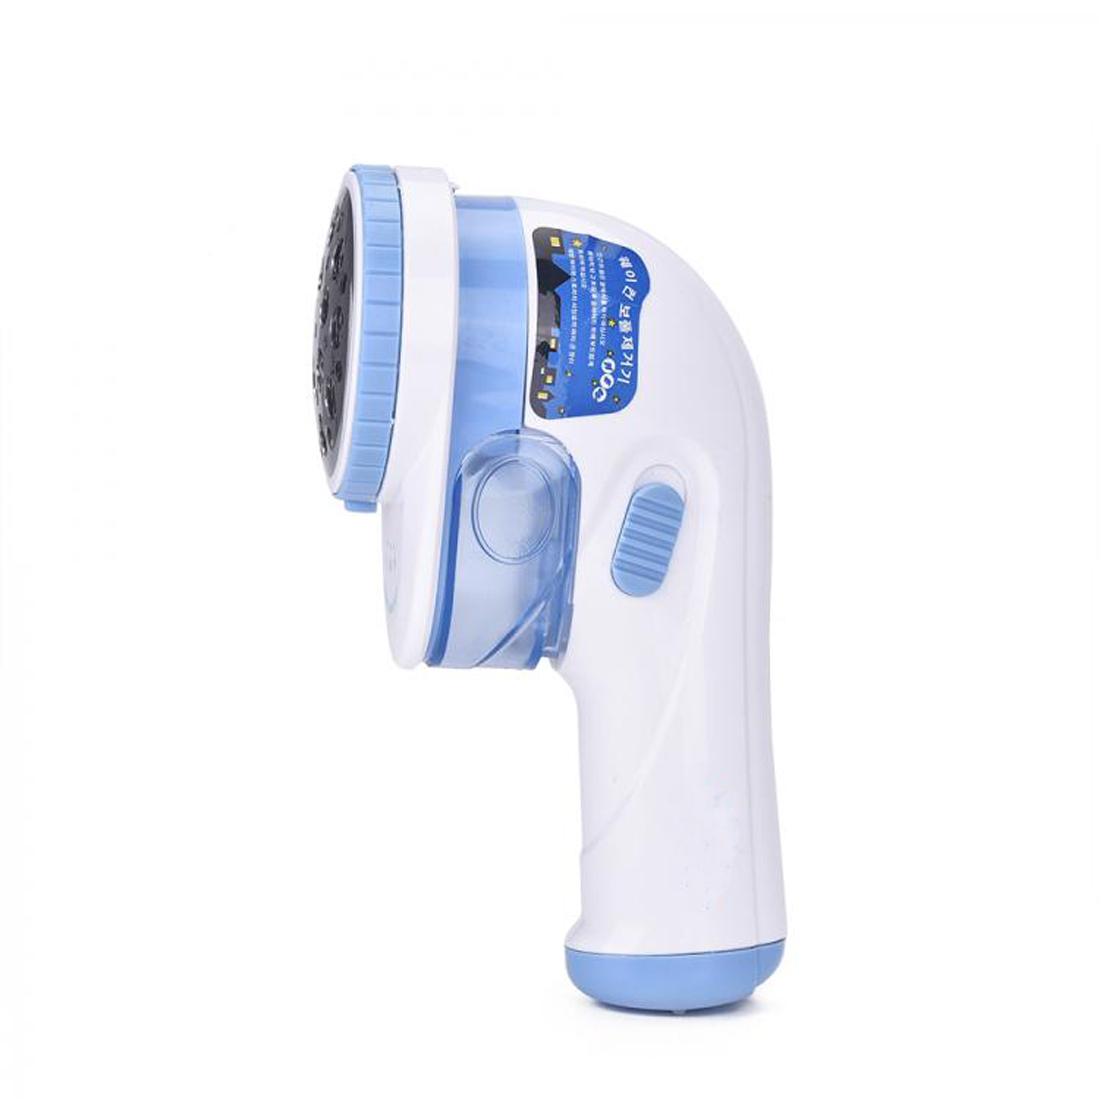 Buy Waken Lint Remover Online @ ₹589 from ShopClues